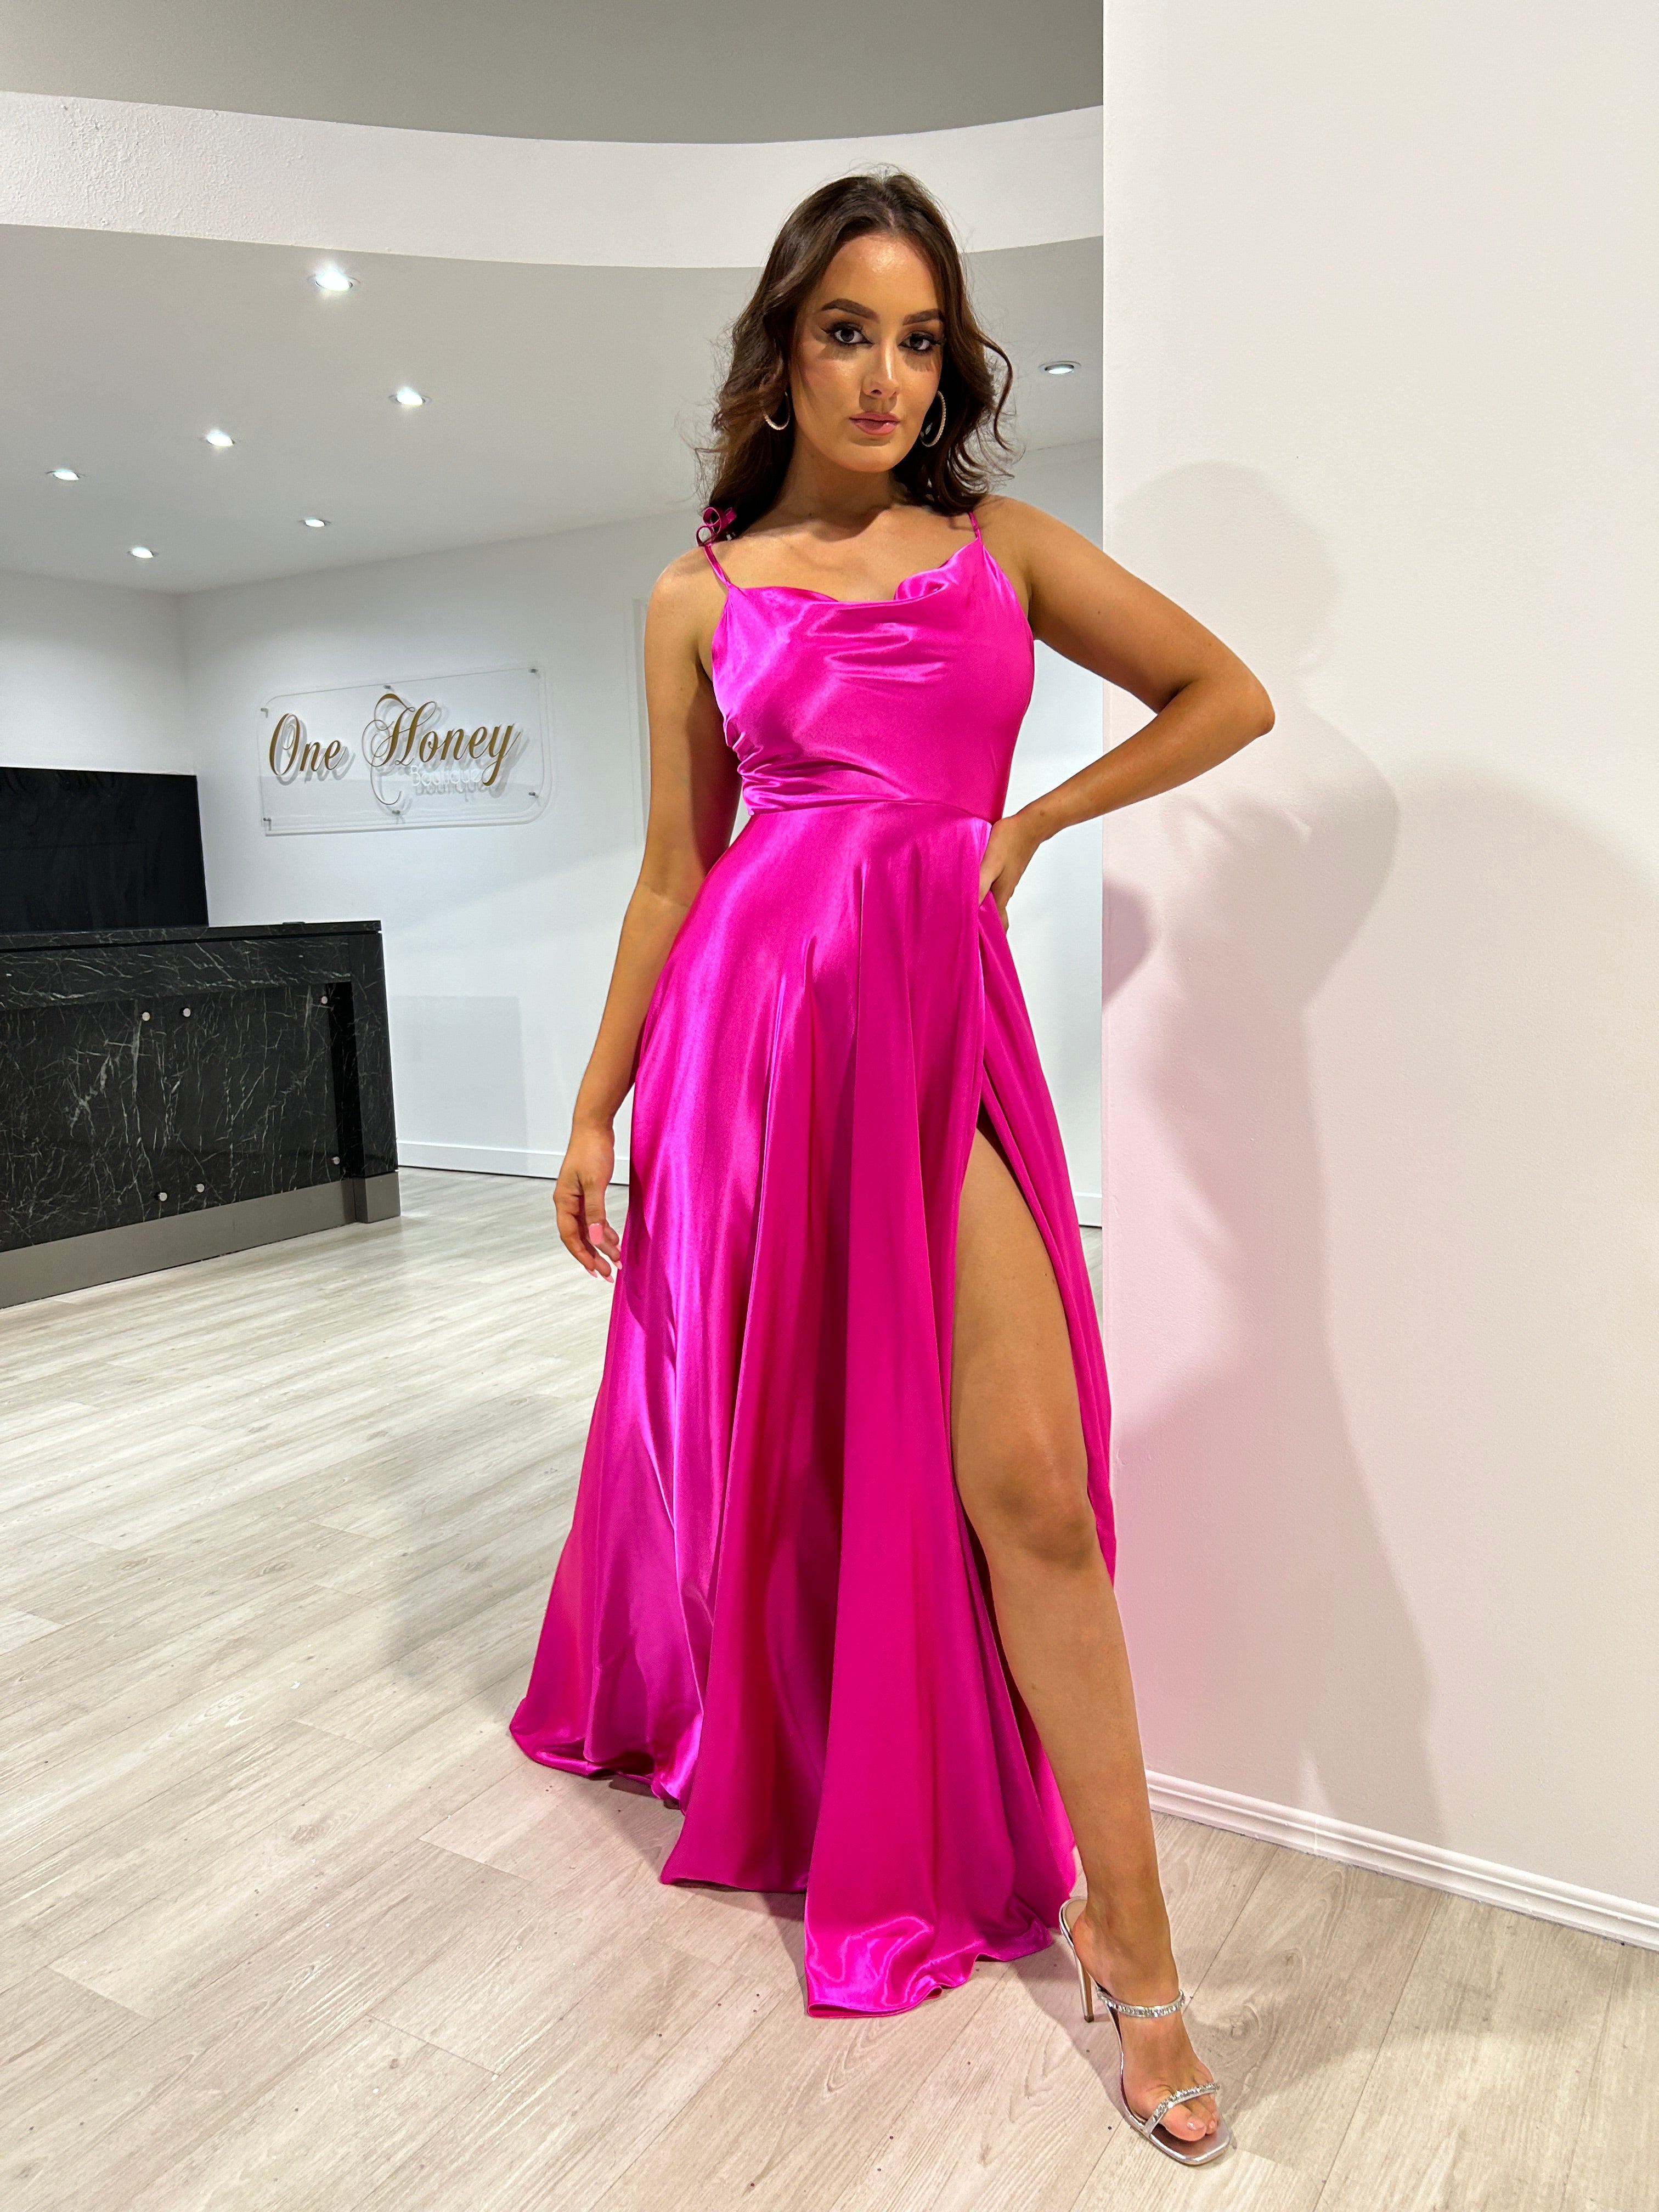 Honey Couture XENA Hot Pink Tie Up A-Line Formal Bridesmaid Dress